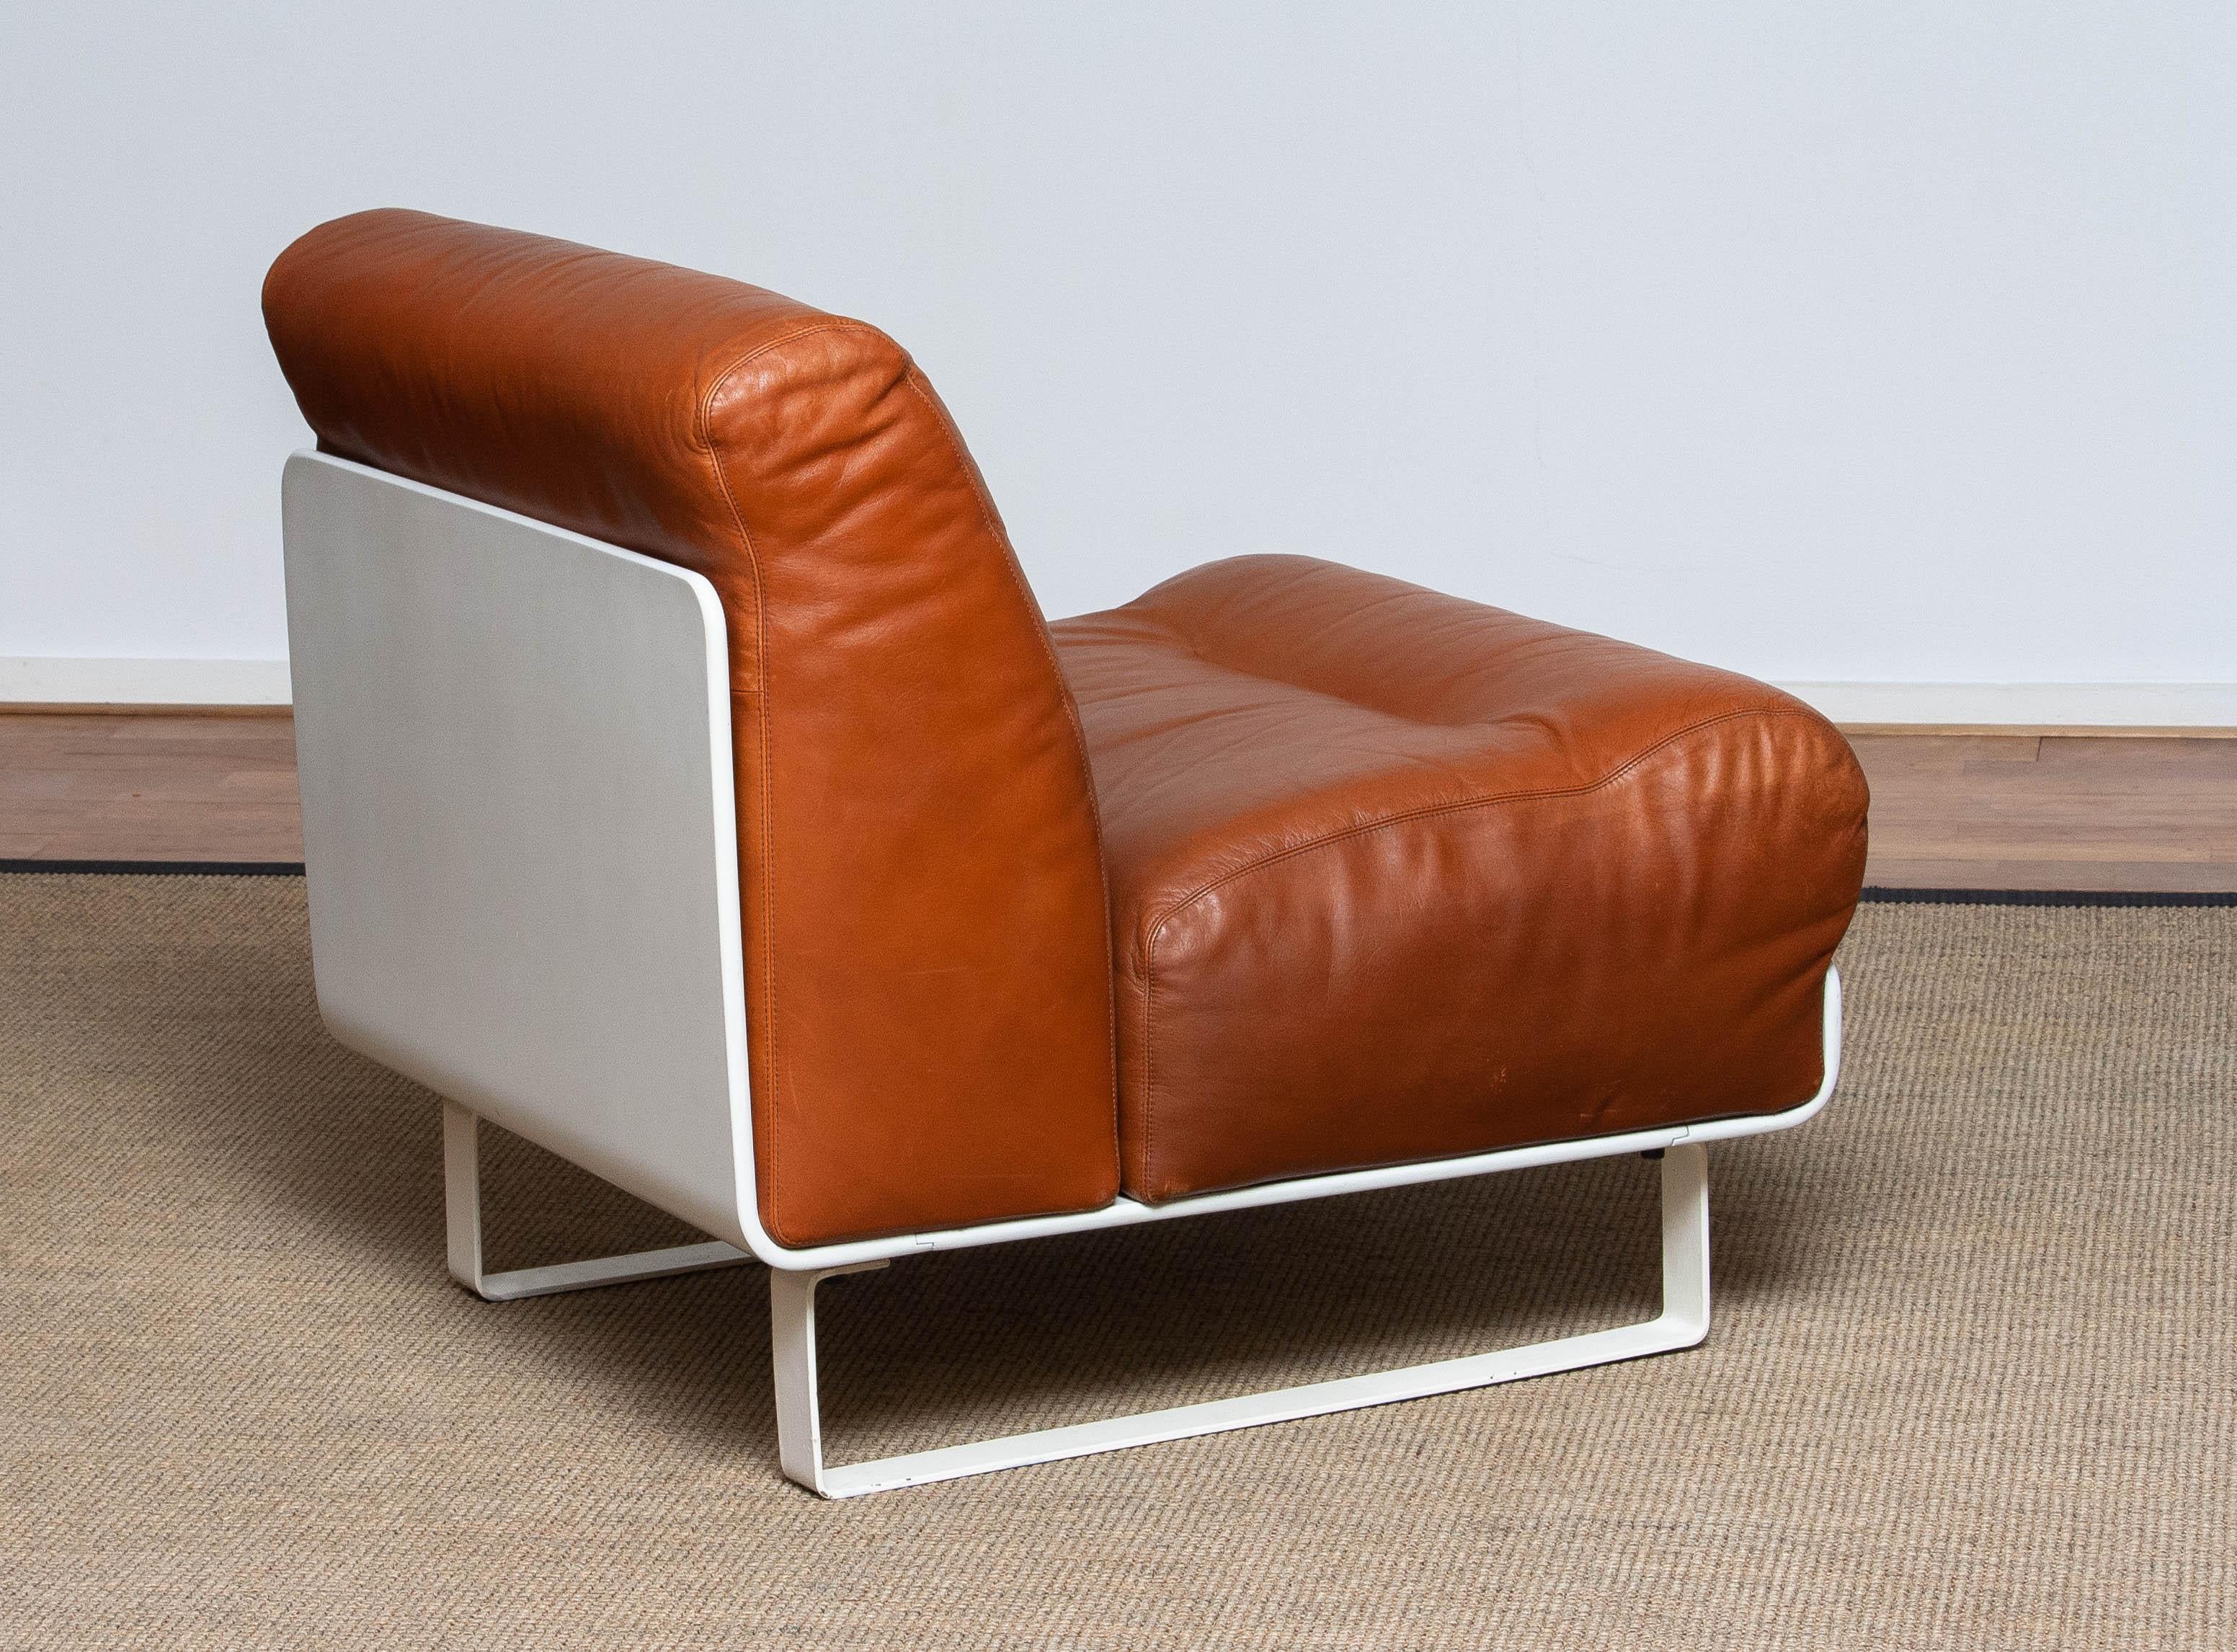 1970's Tan / Cognac Leather Lounge / Club Chair with White Shell 'Orbis' by COR In Good Condition For Sale In Silvolde, Gelderland